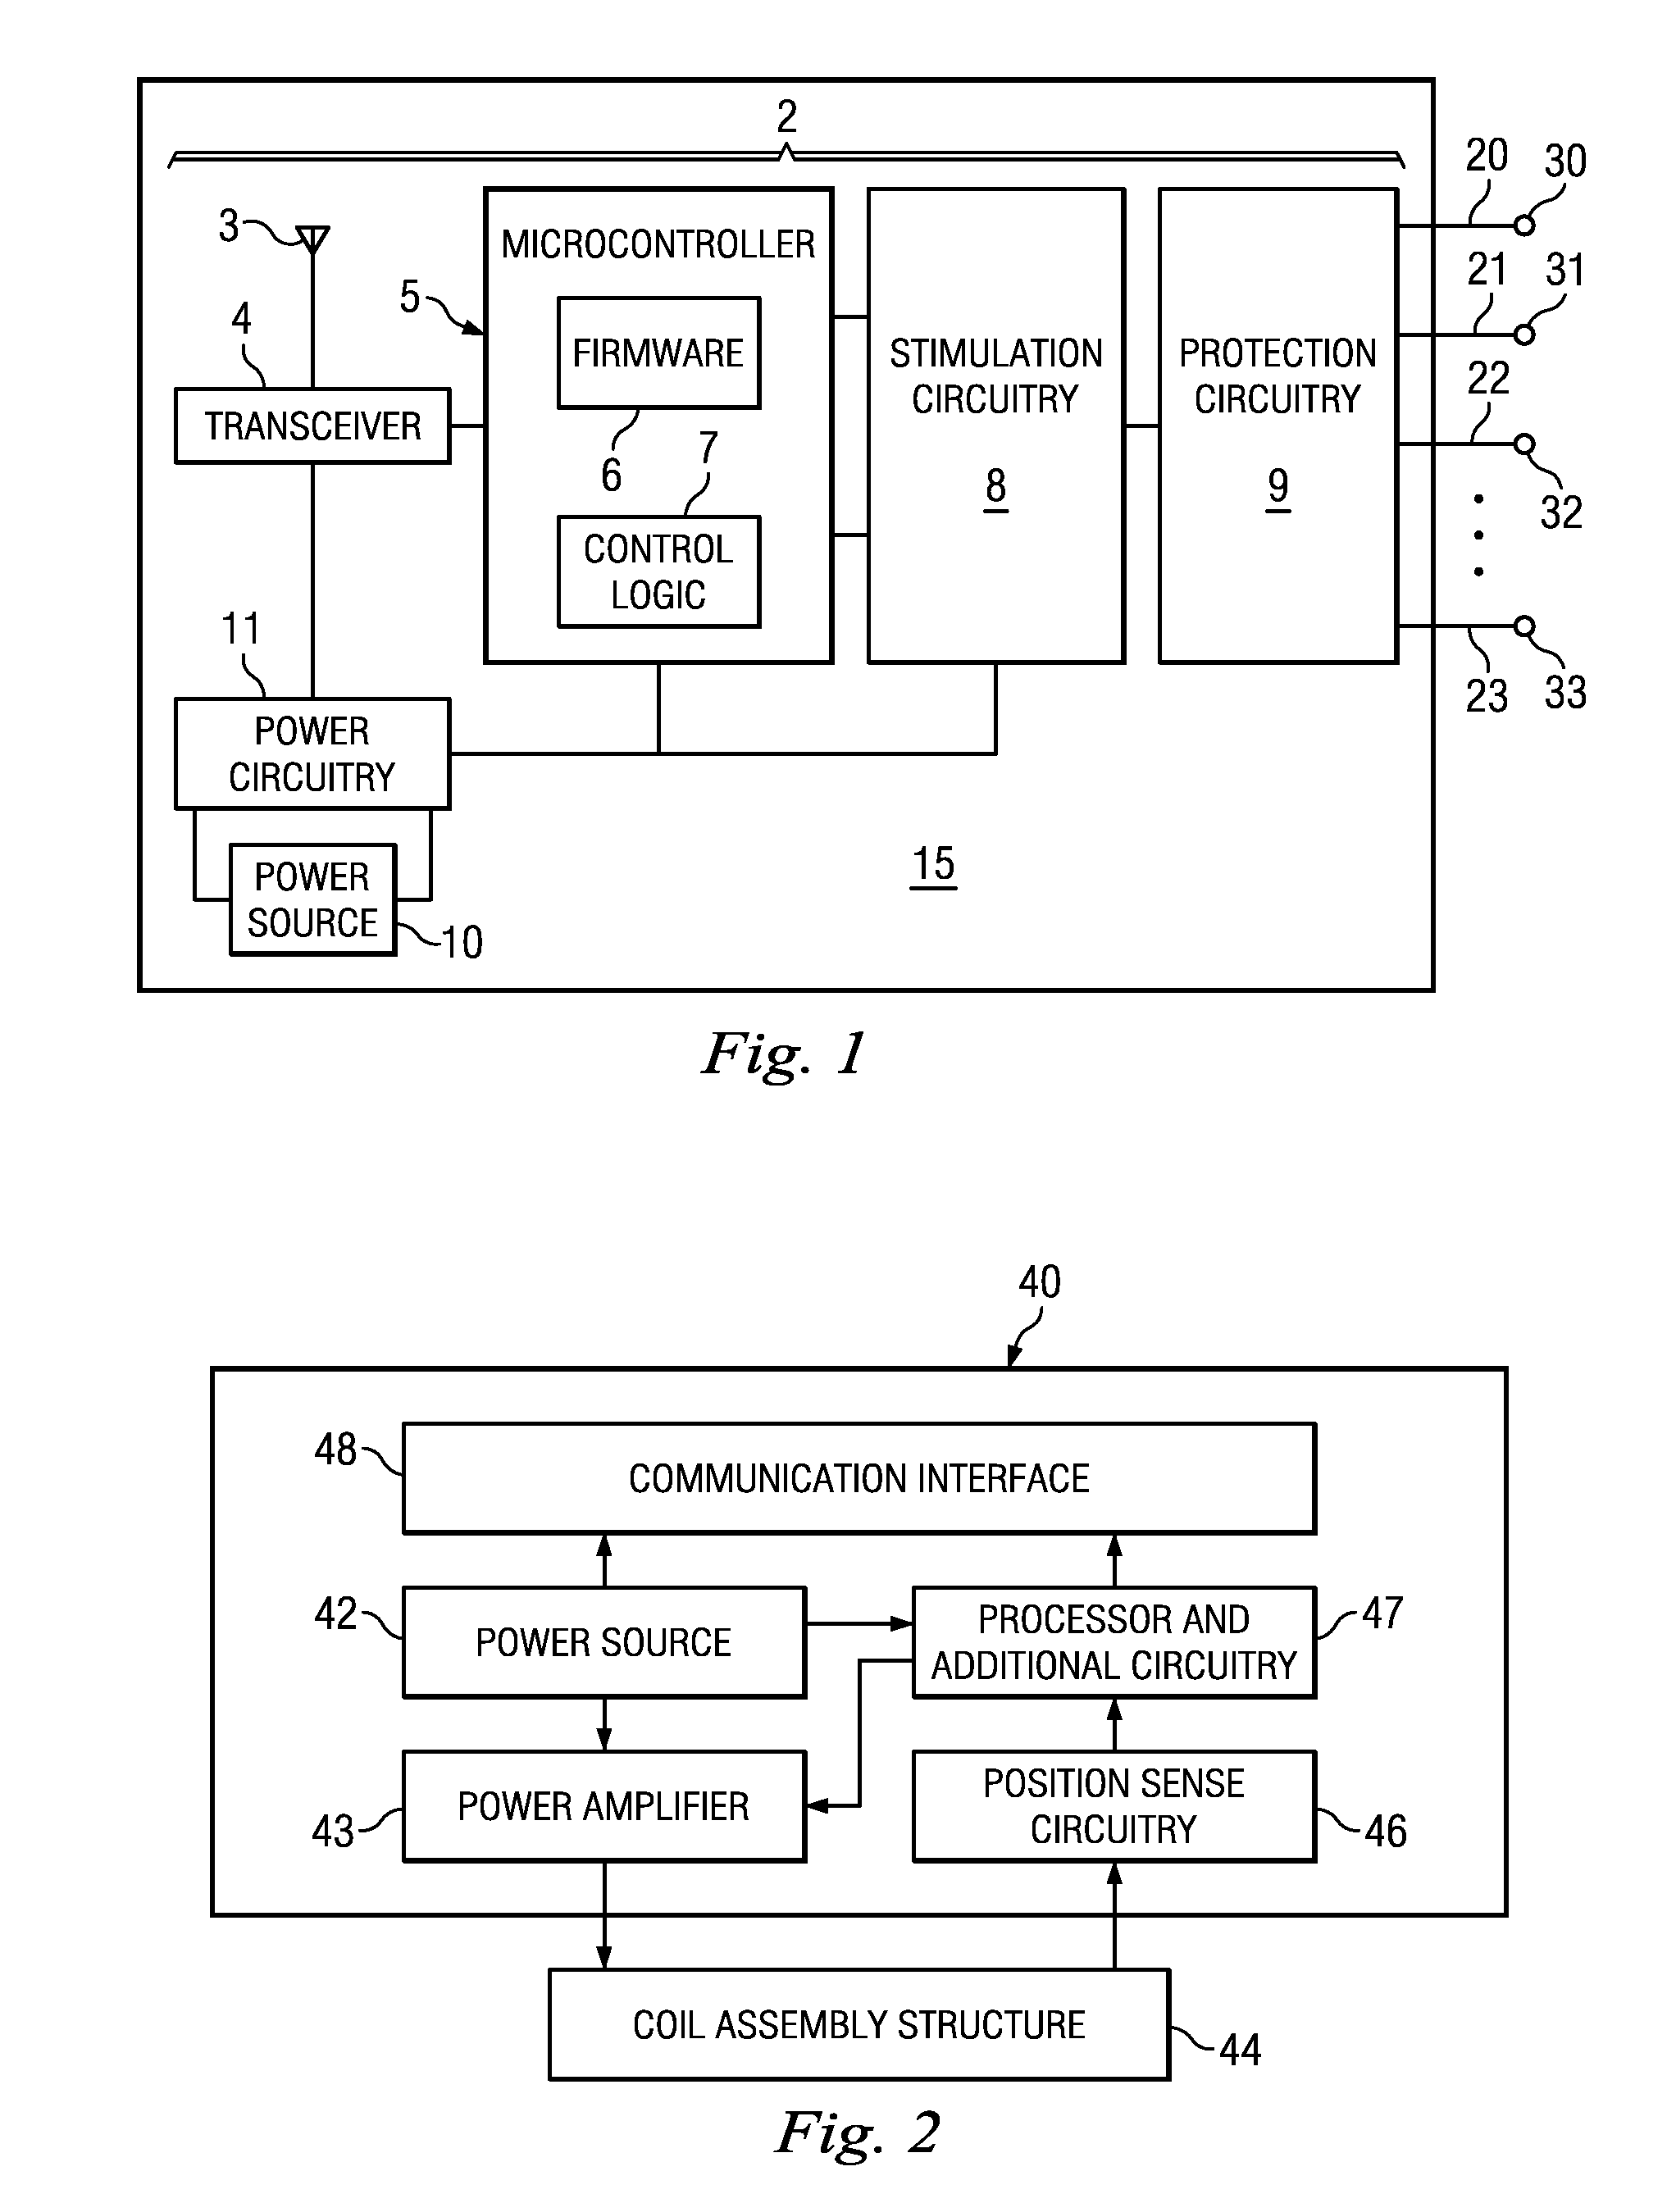 Devices and methods for visually indicating the alignment of a transcutaneous energy transfer device over an implanted medical device